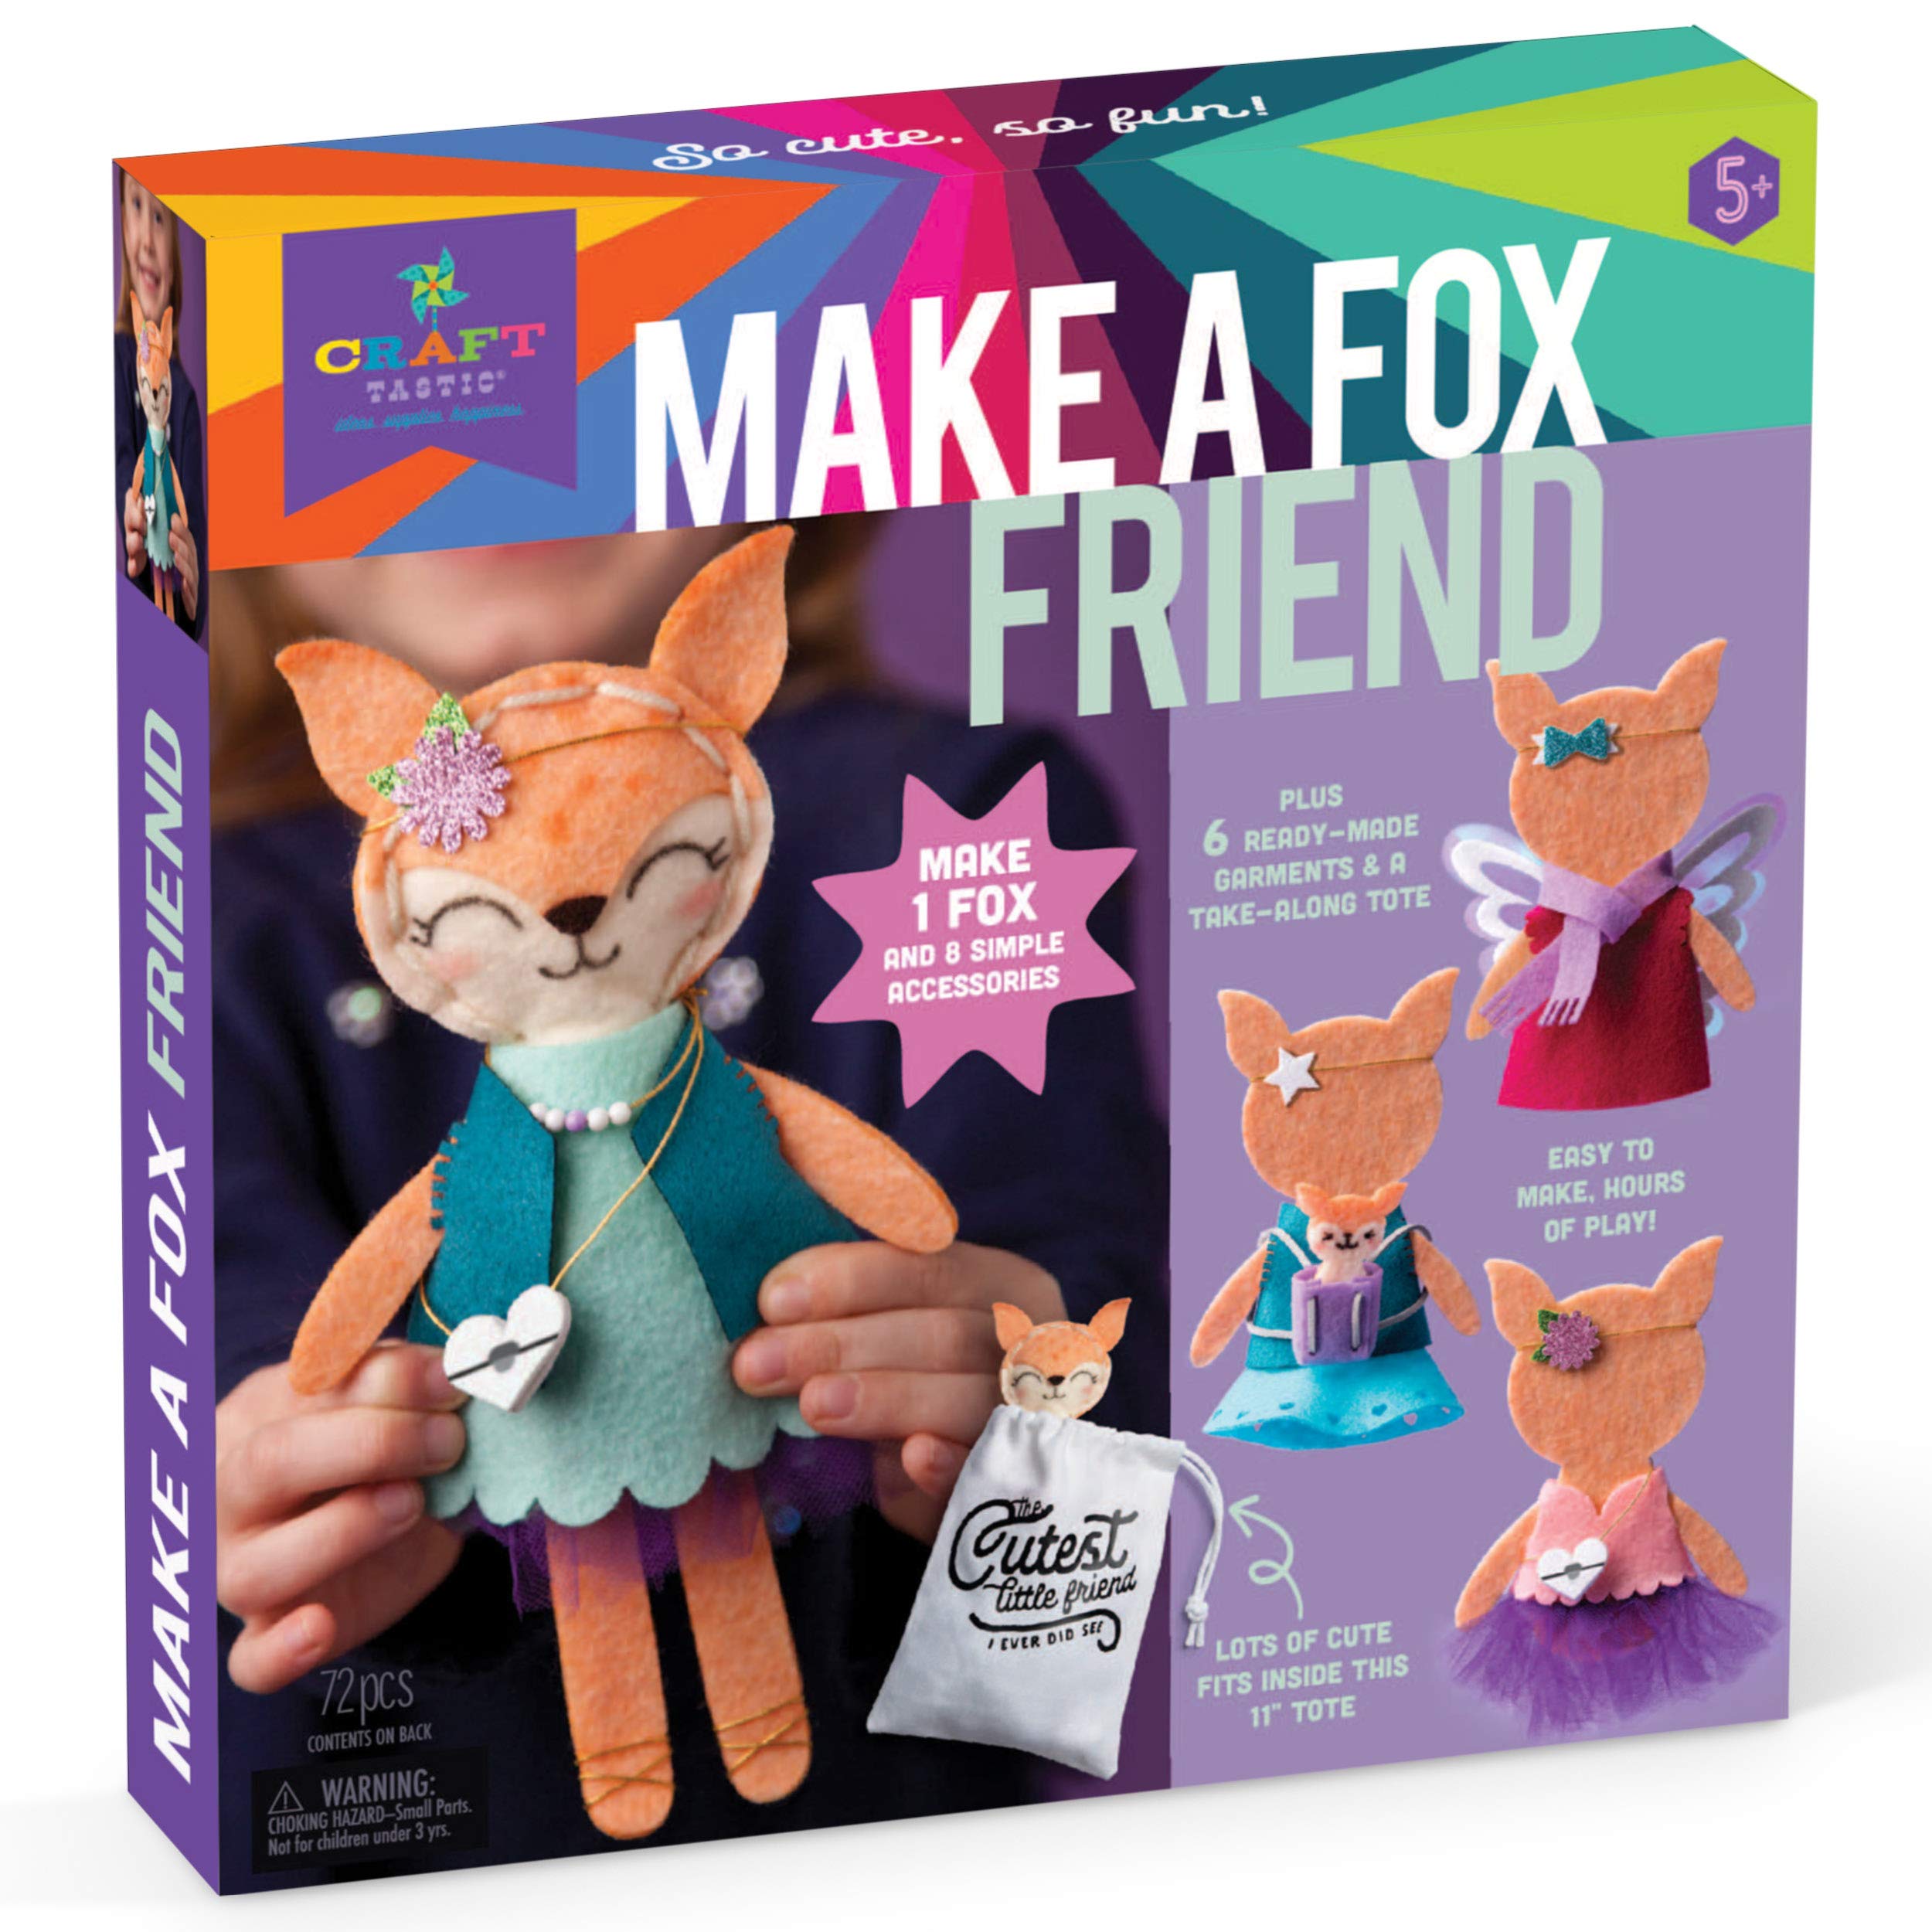 craft-tastic - Make a Bunny Friend craft Kit - Learn to Make 1 Easy-to-Sew Stuffie with clothes & Accessories